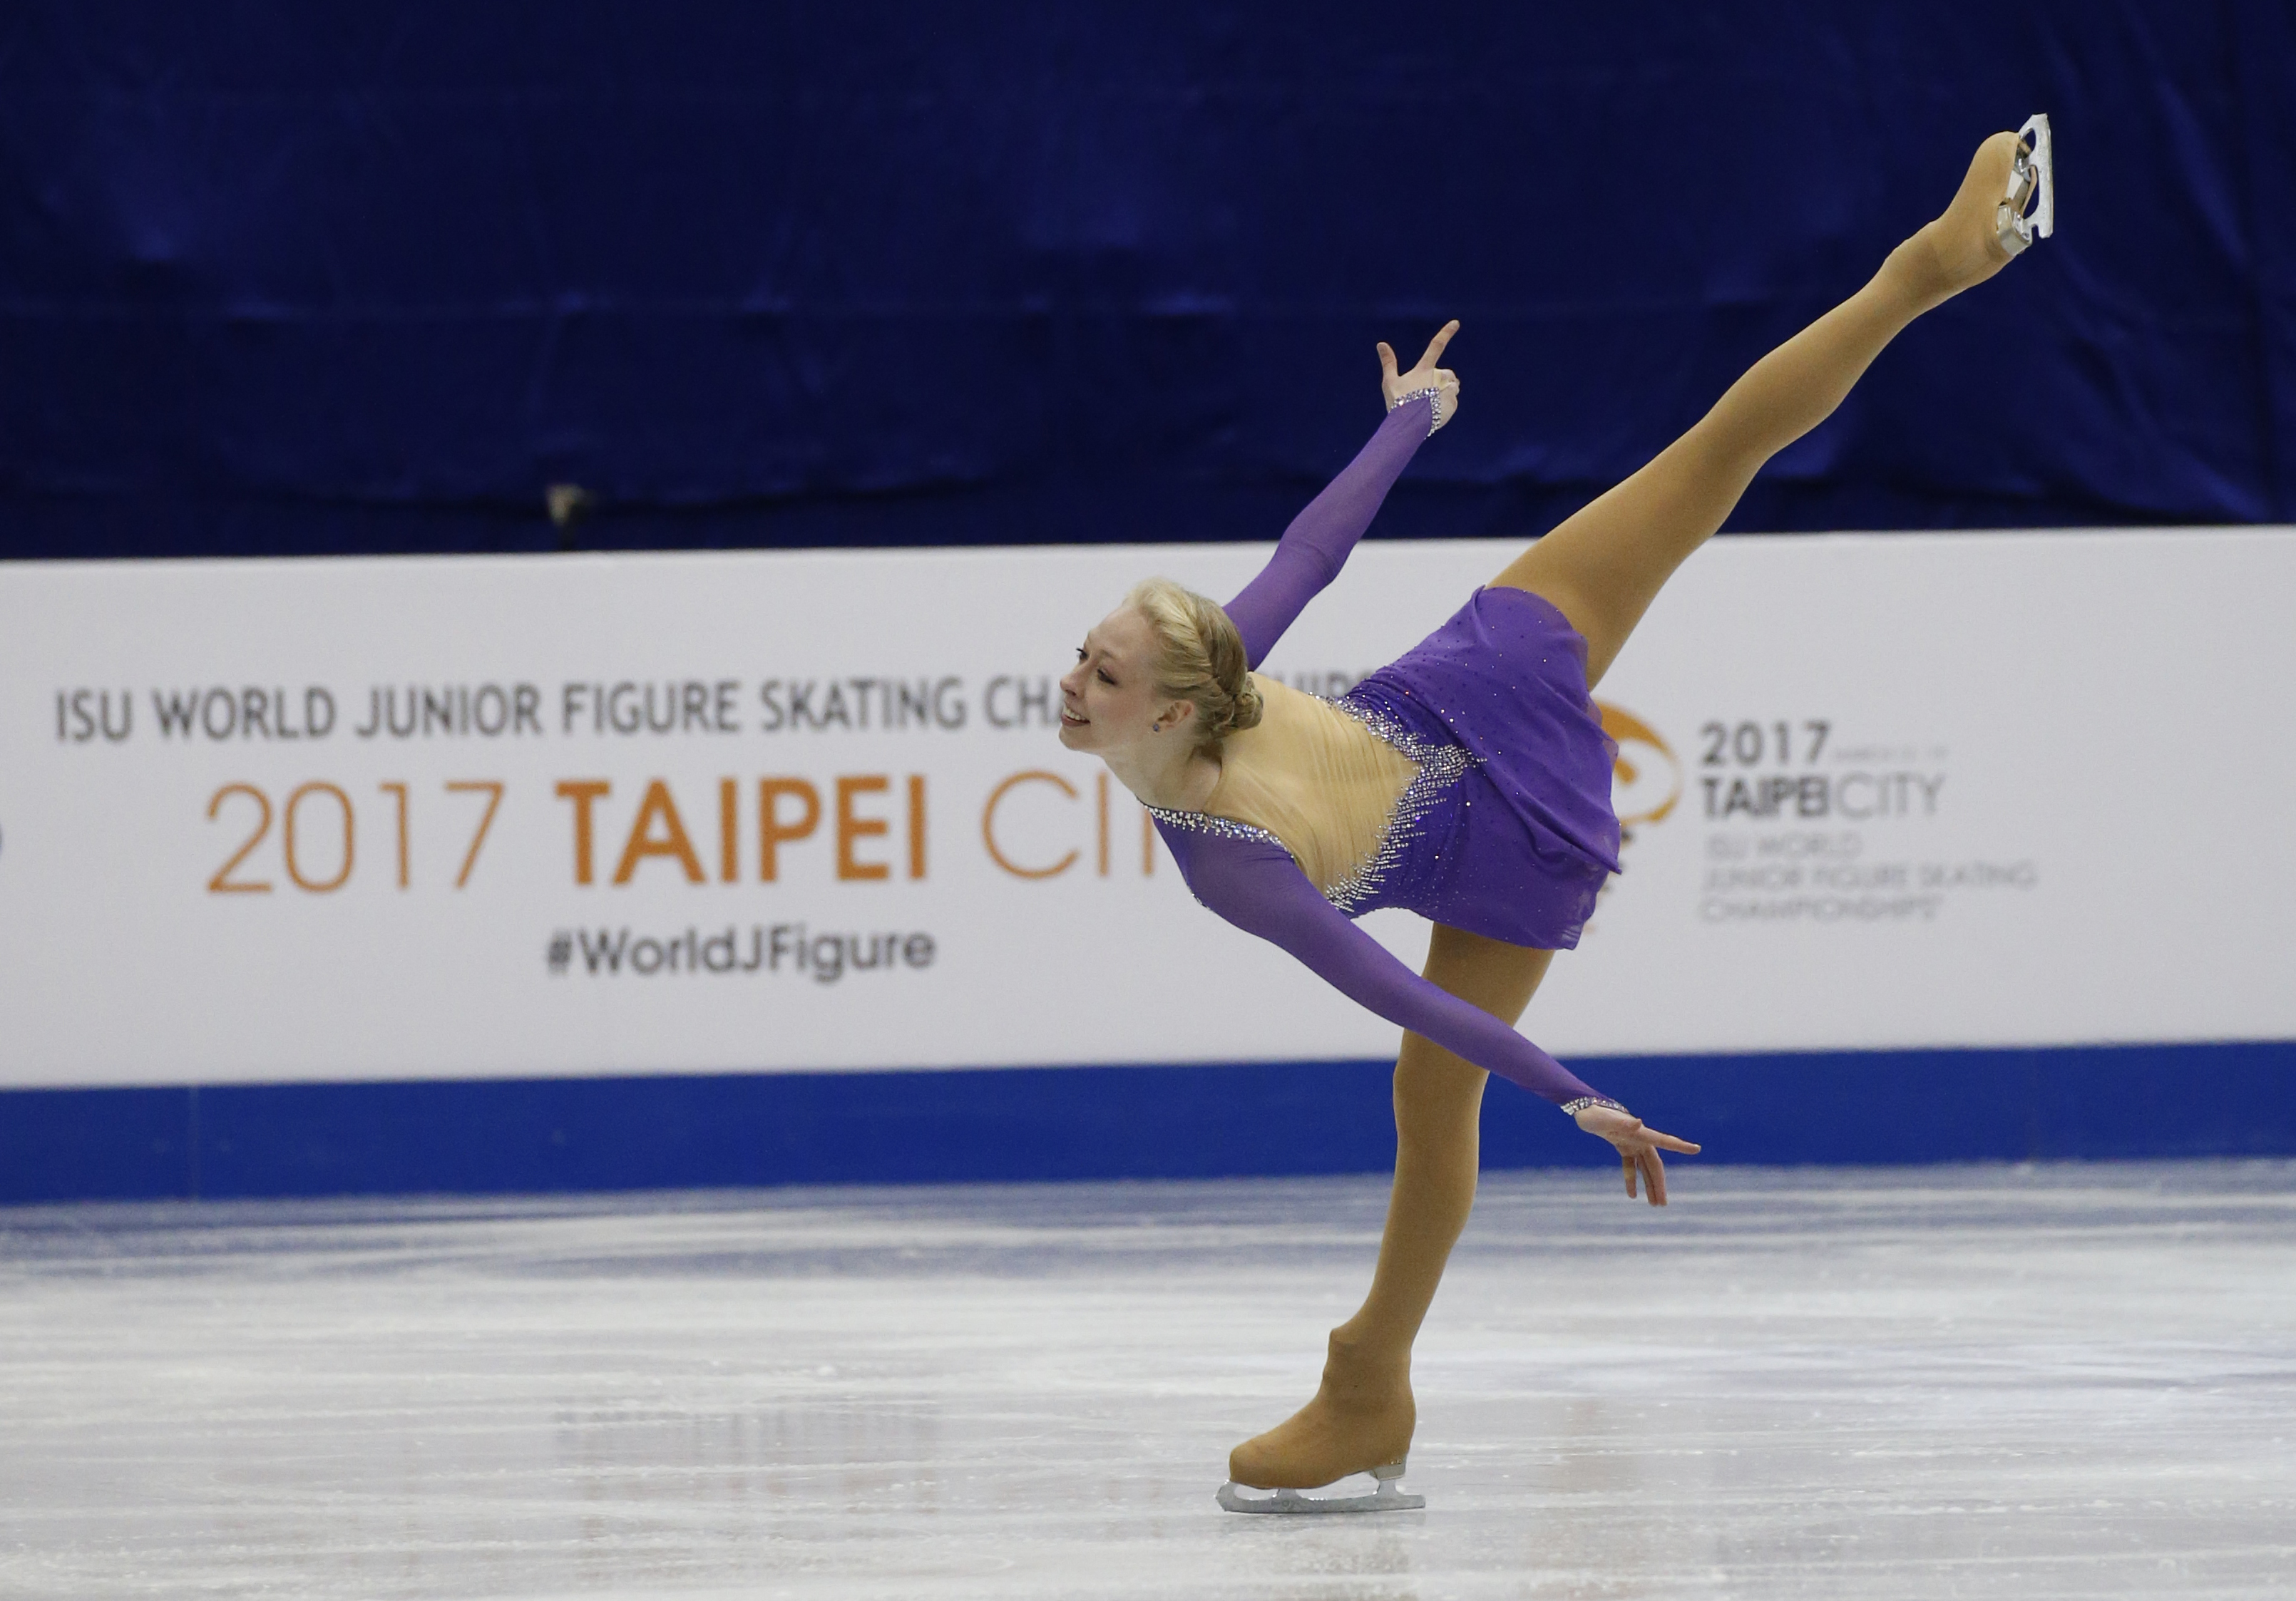 Bradie Tennell performs a spiral during the 2017 World Junior Figure Skating Championships in Taipei City, Taiwan.